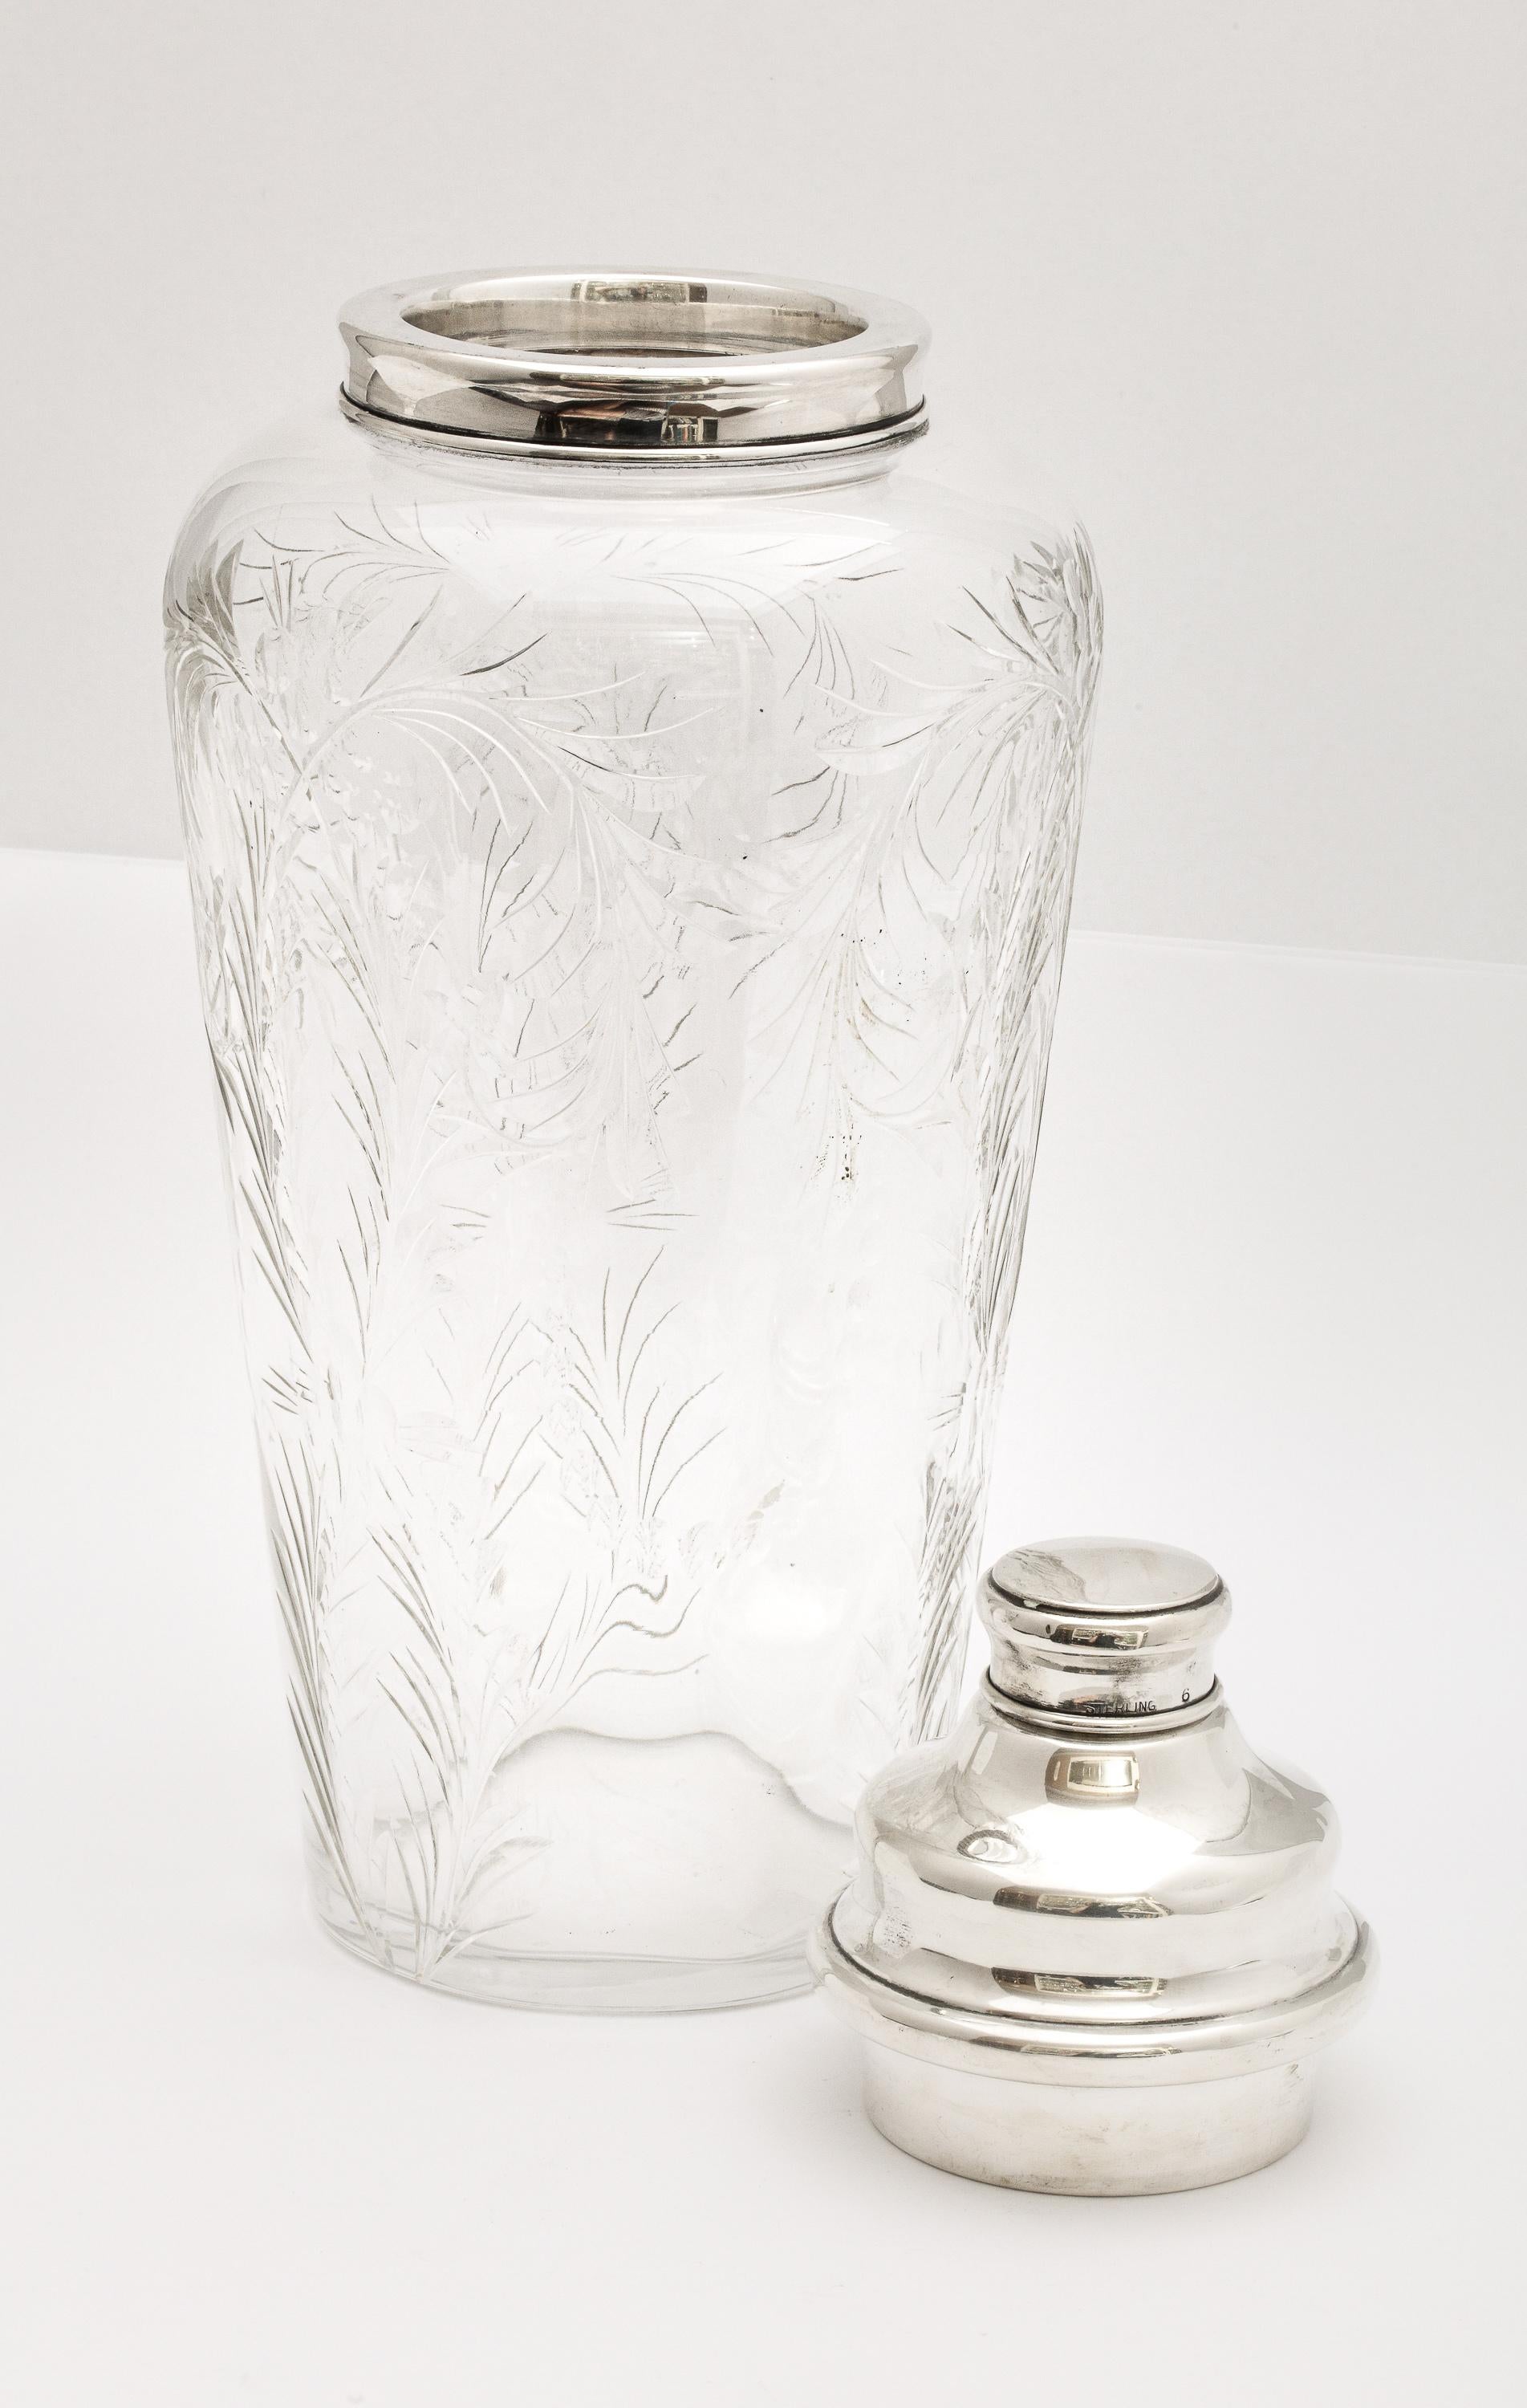 Art Deco Sterling Silver-Mounted Cocktail Shaker by Hawkes 5